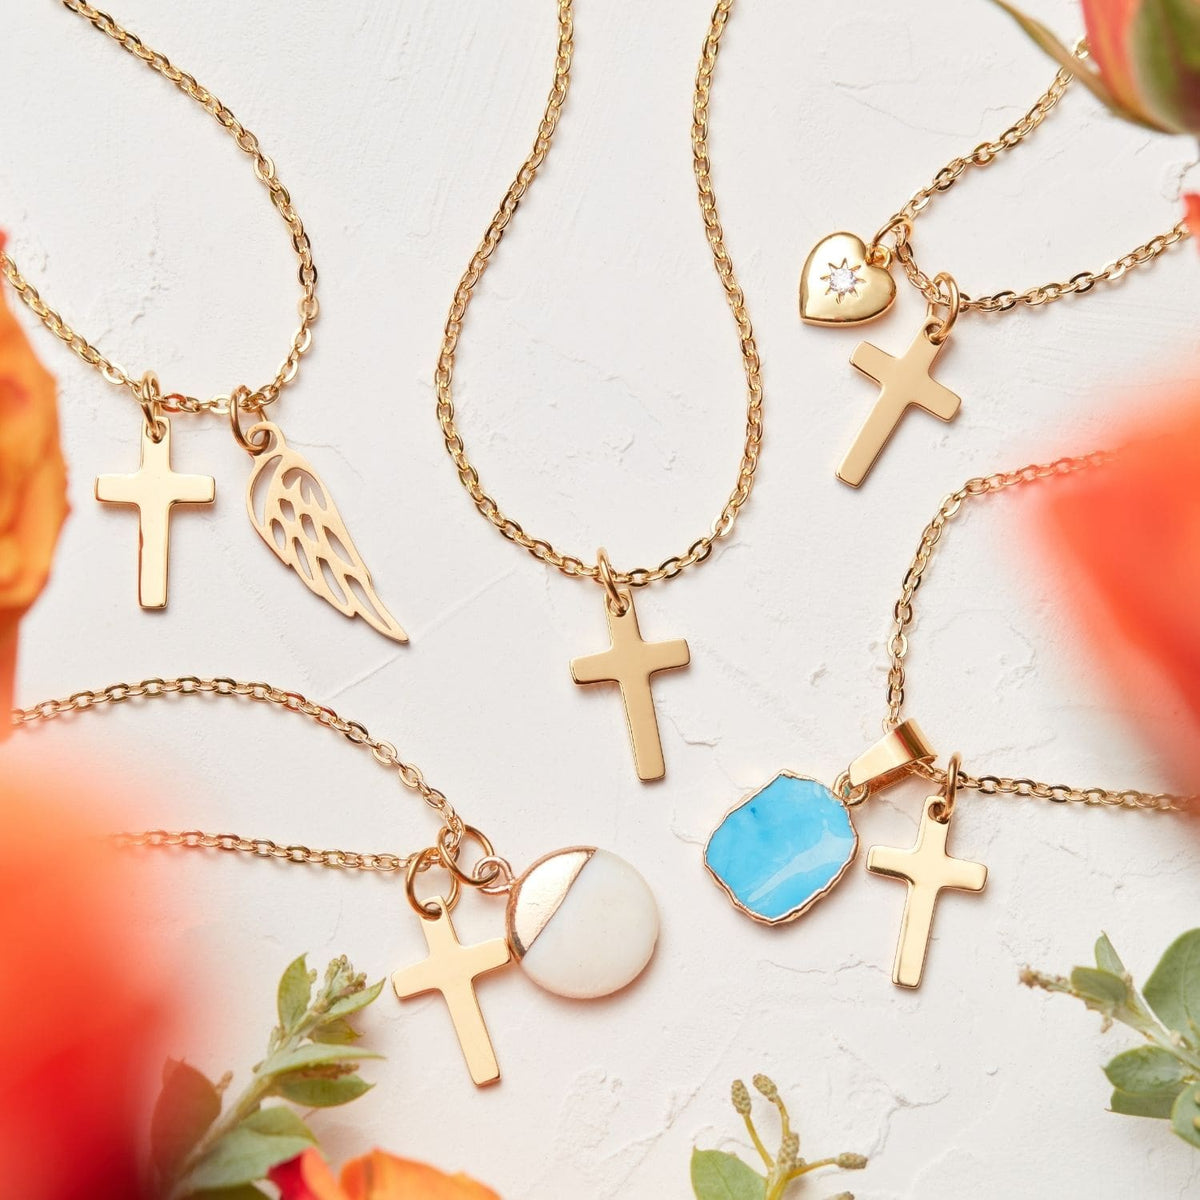 To My Daughter | Isaiah 44:3-5 | Cross Necklace